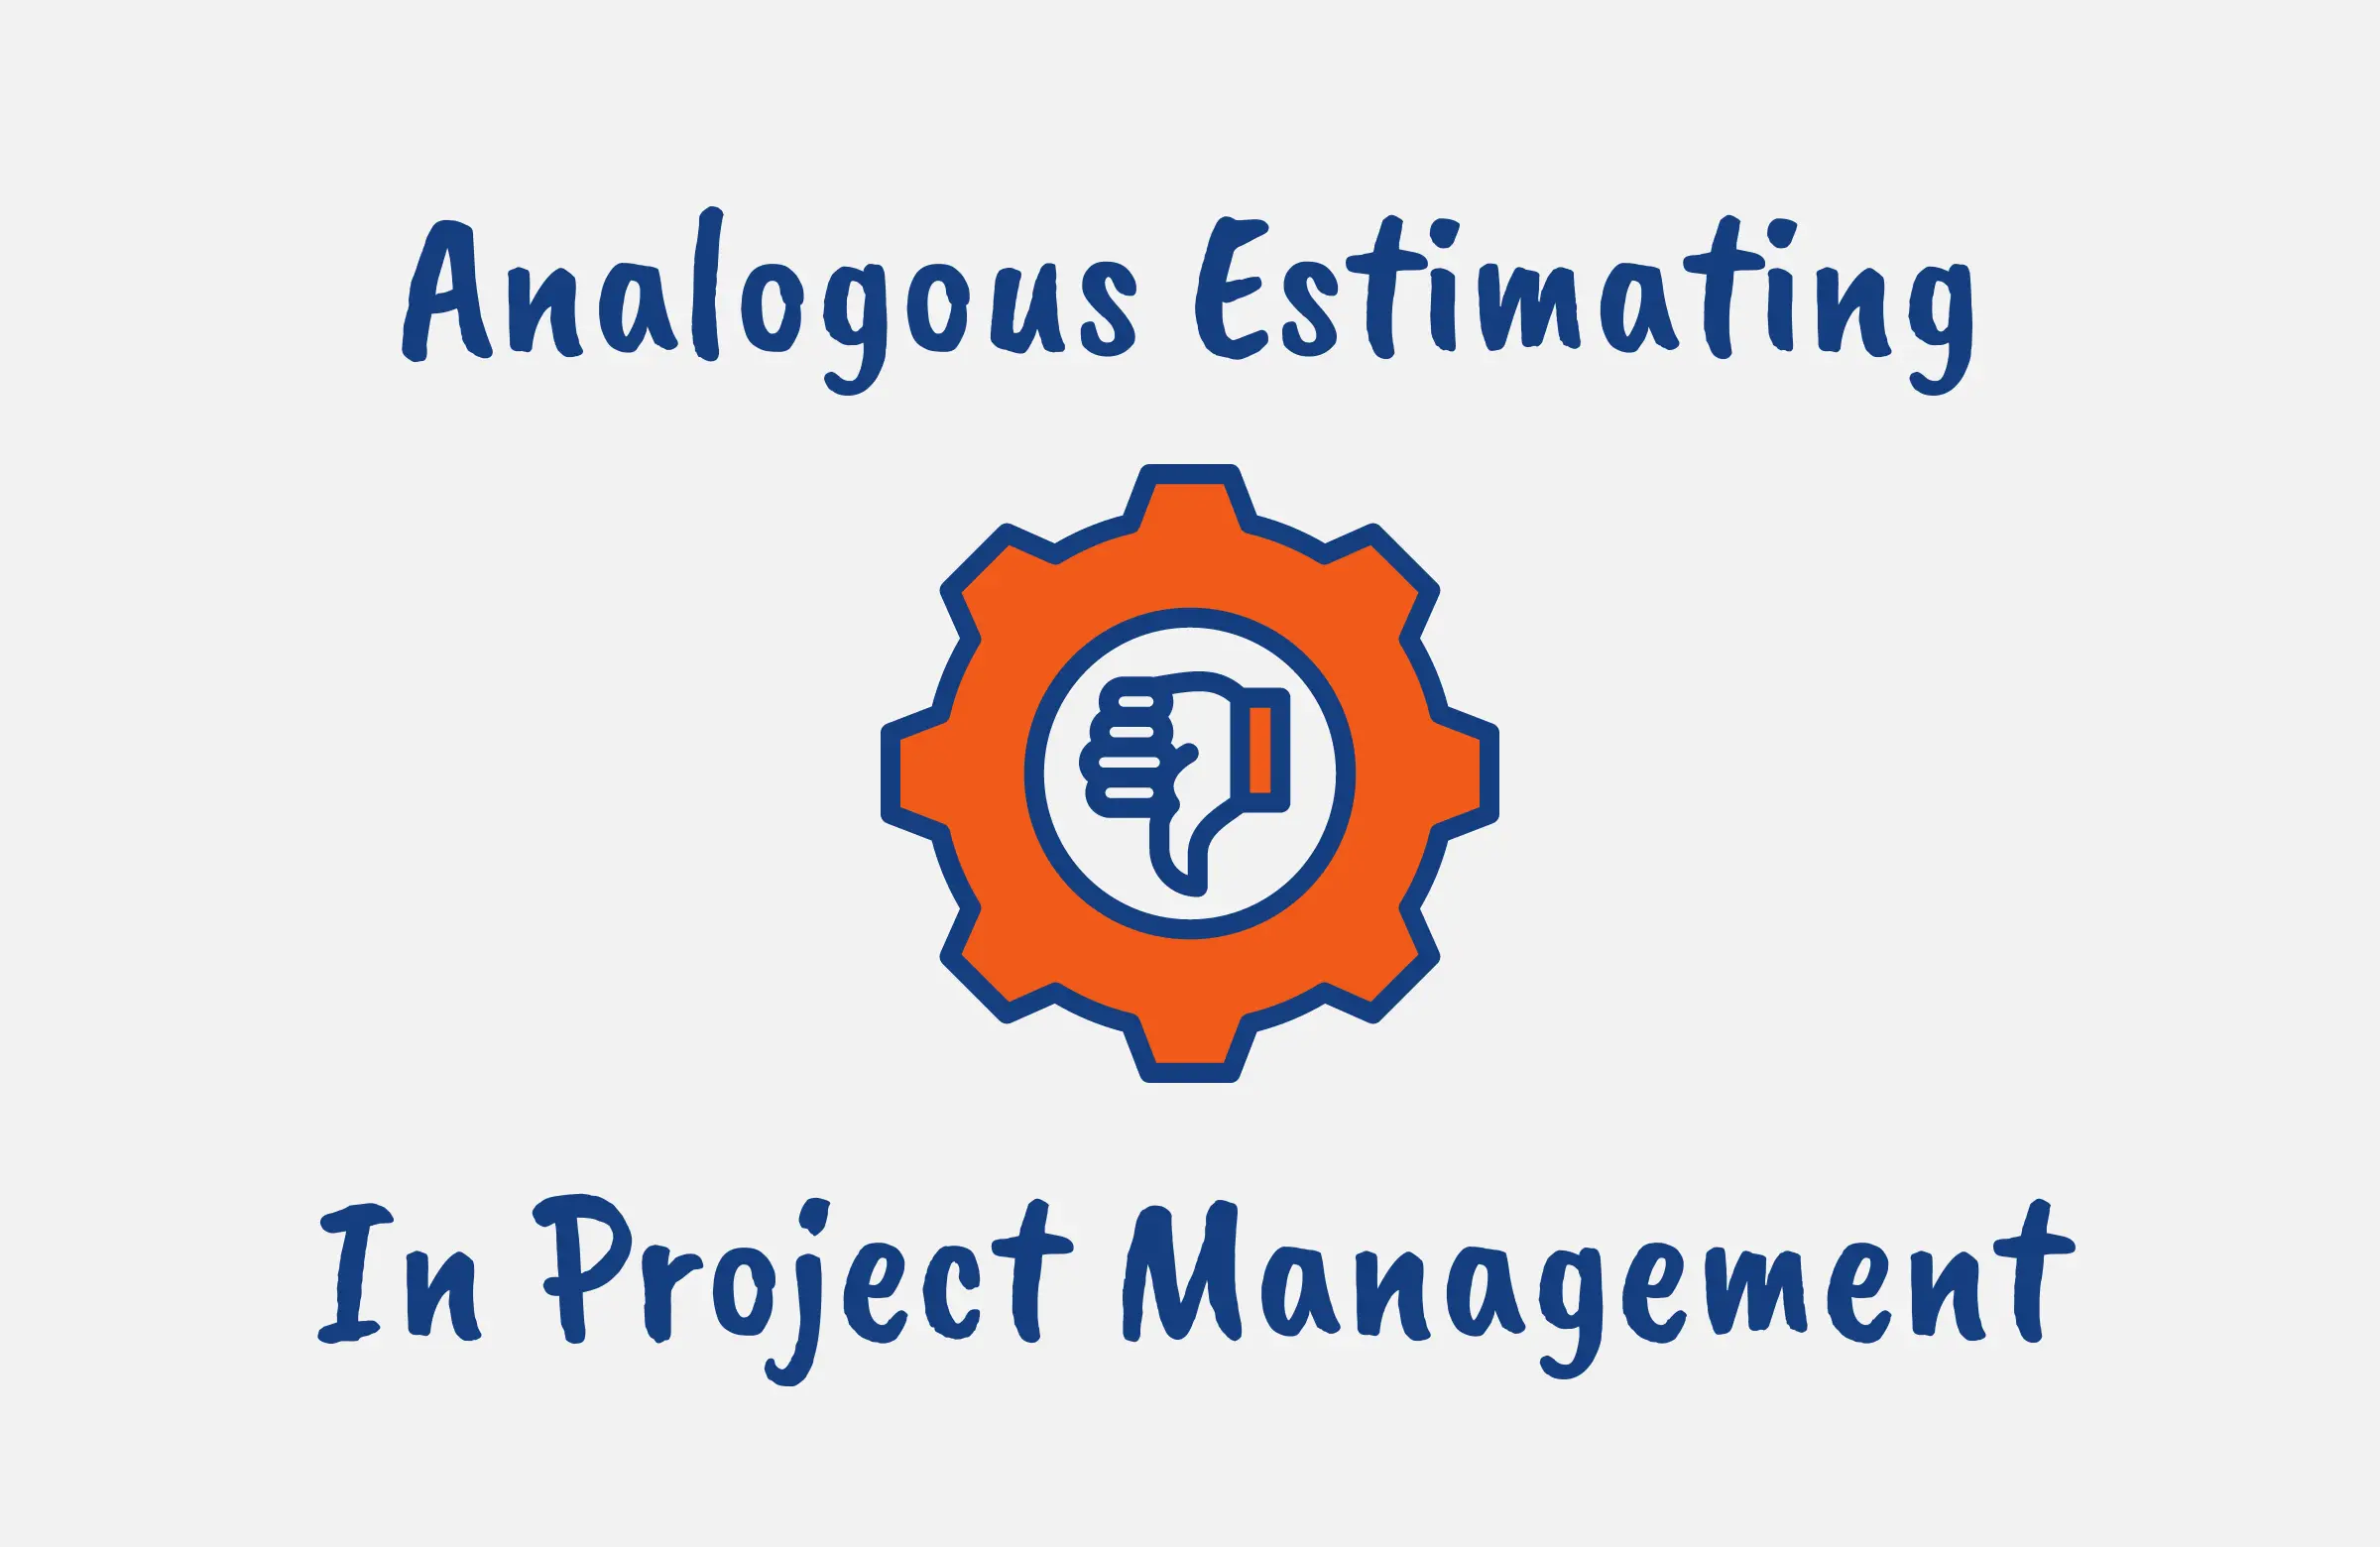 What is Analogous Estimating in Project Management